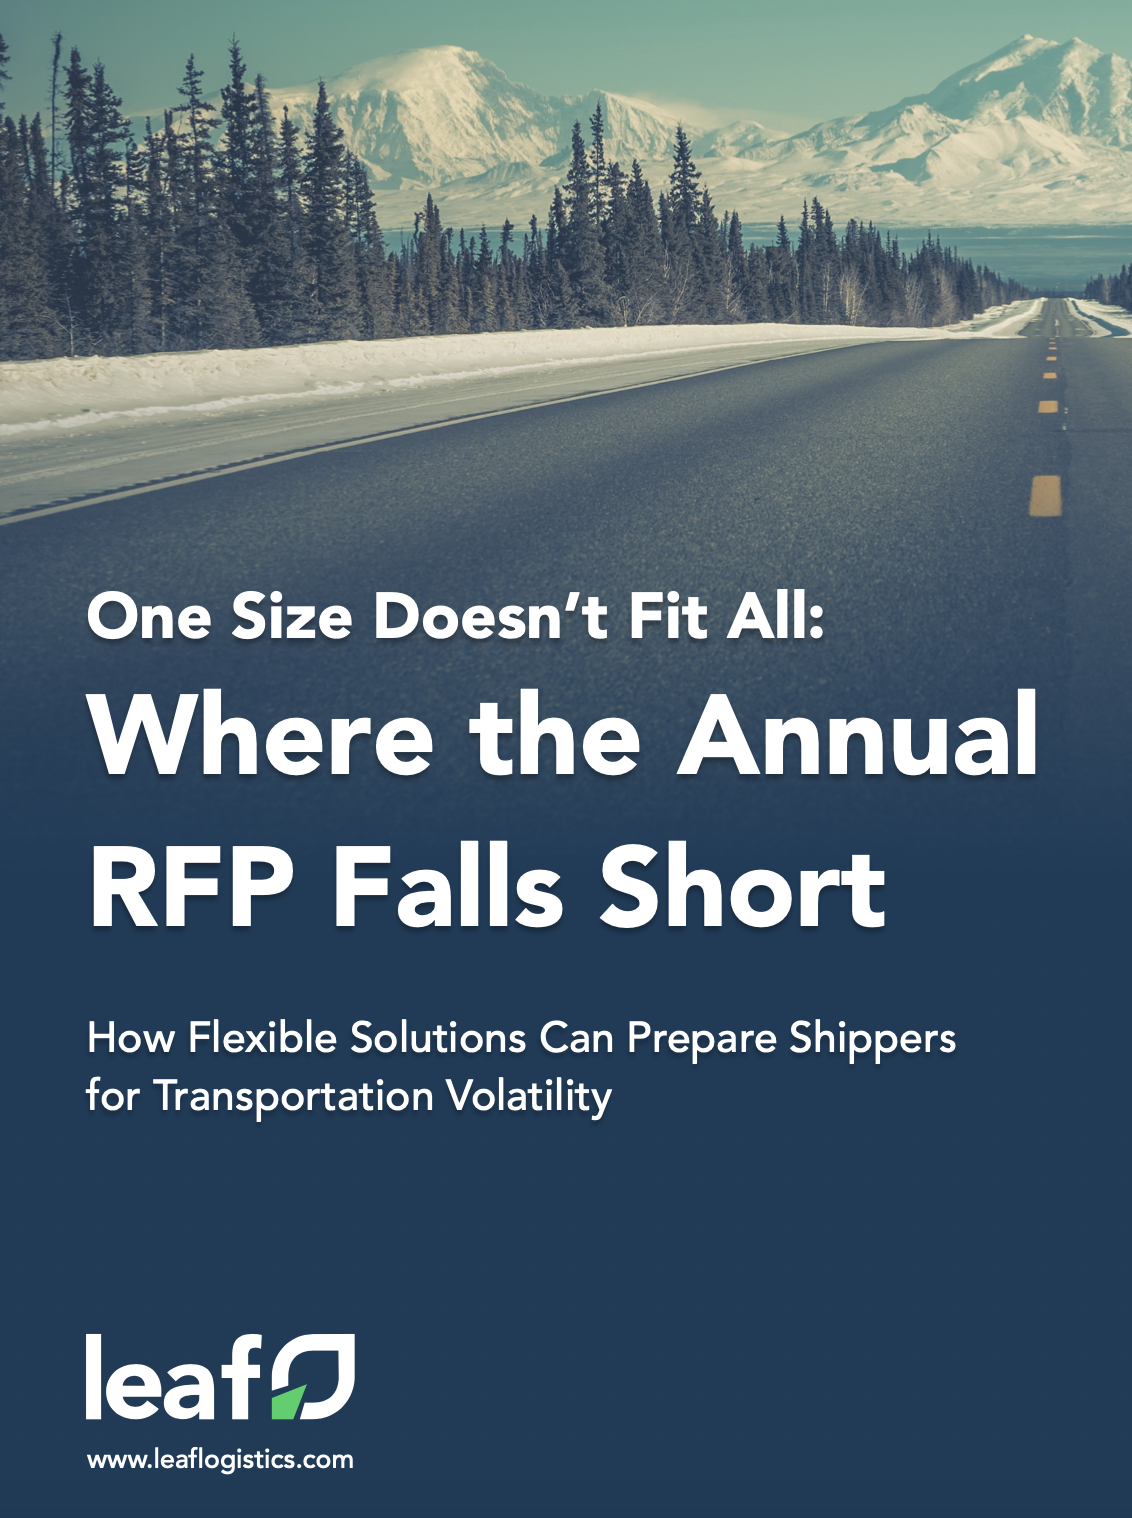 Cover of Leaf Logistics white paper titled One Size Doesn’t Fit All: Where the Annual RFP Falls Short - How Flexible Solutions Can Prepare Shippers for Transportation Volatility